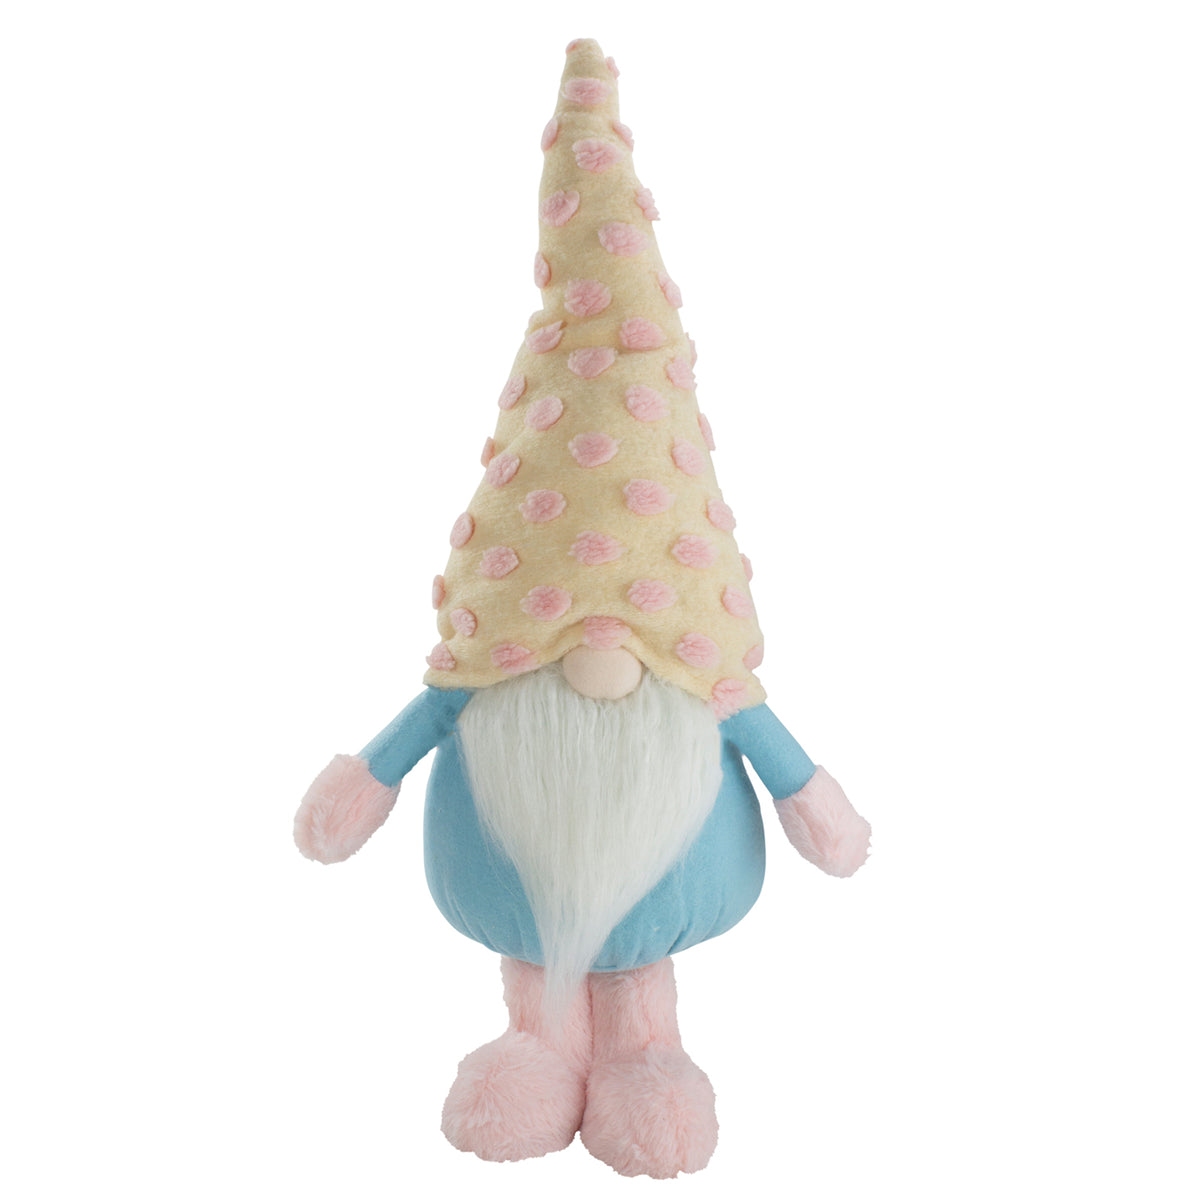 Standing Spring Plush Gnome with a Polka Dot Hat, 22"